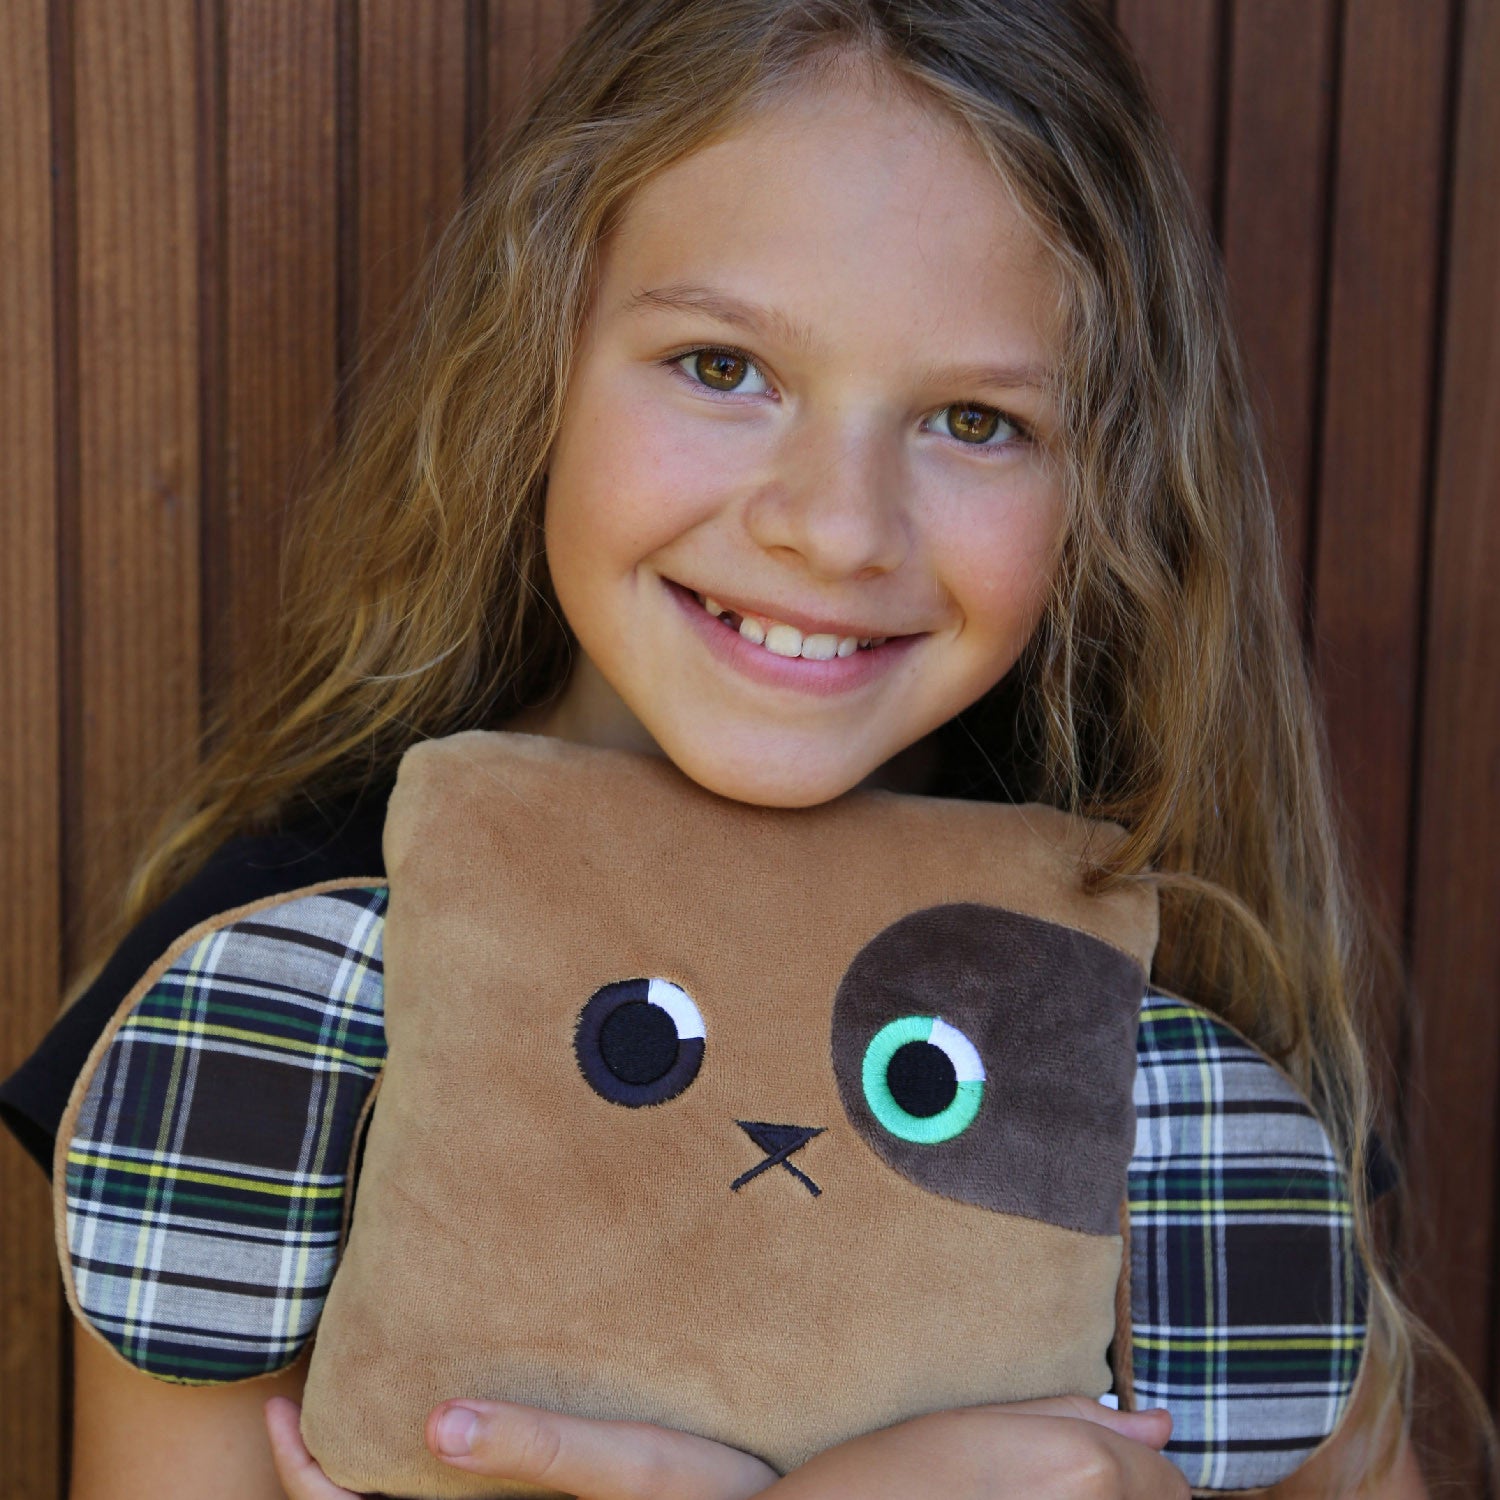 Poketti Puppy Dog Plush Pillow with a Pocket with Founder Toni Loew